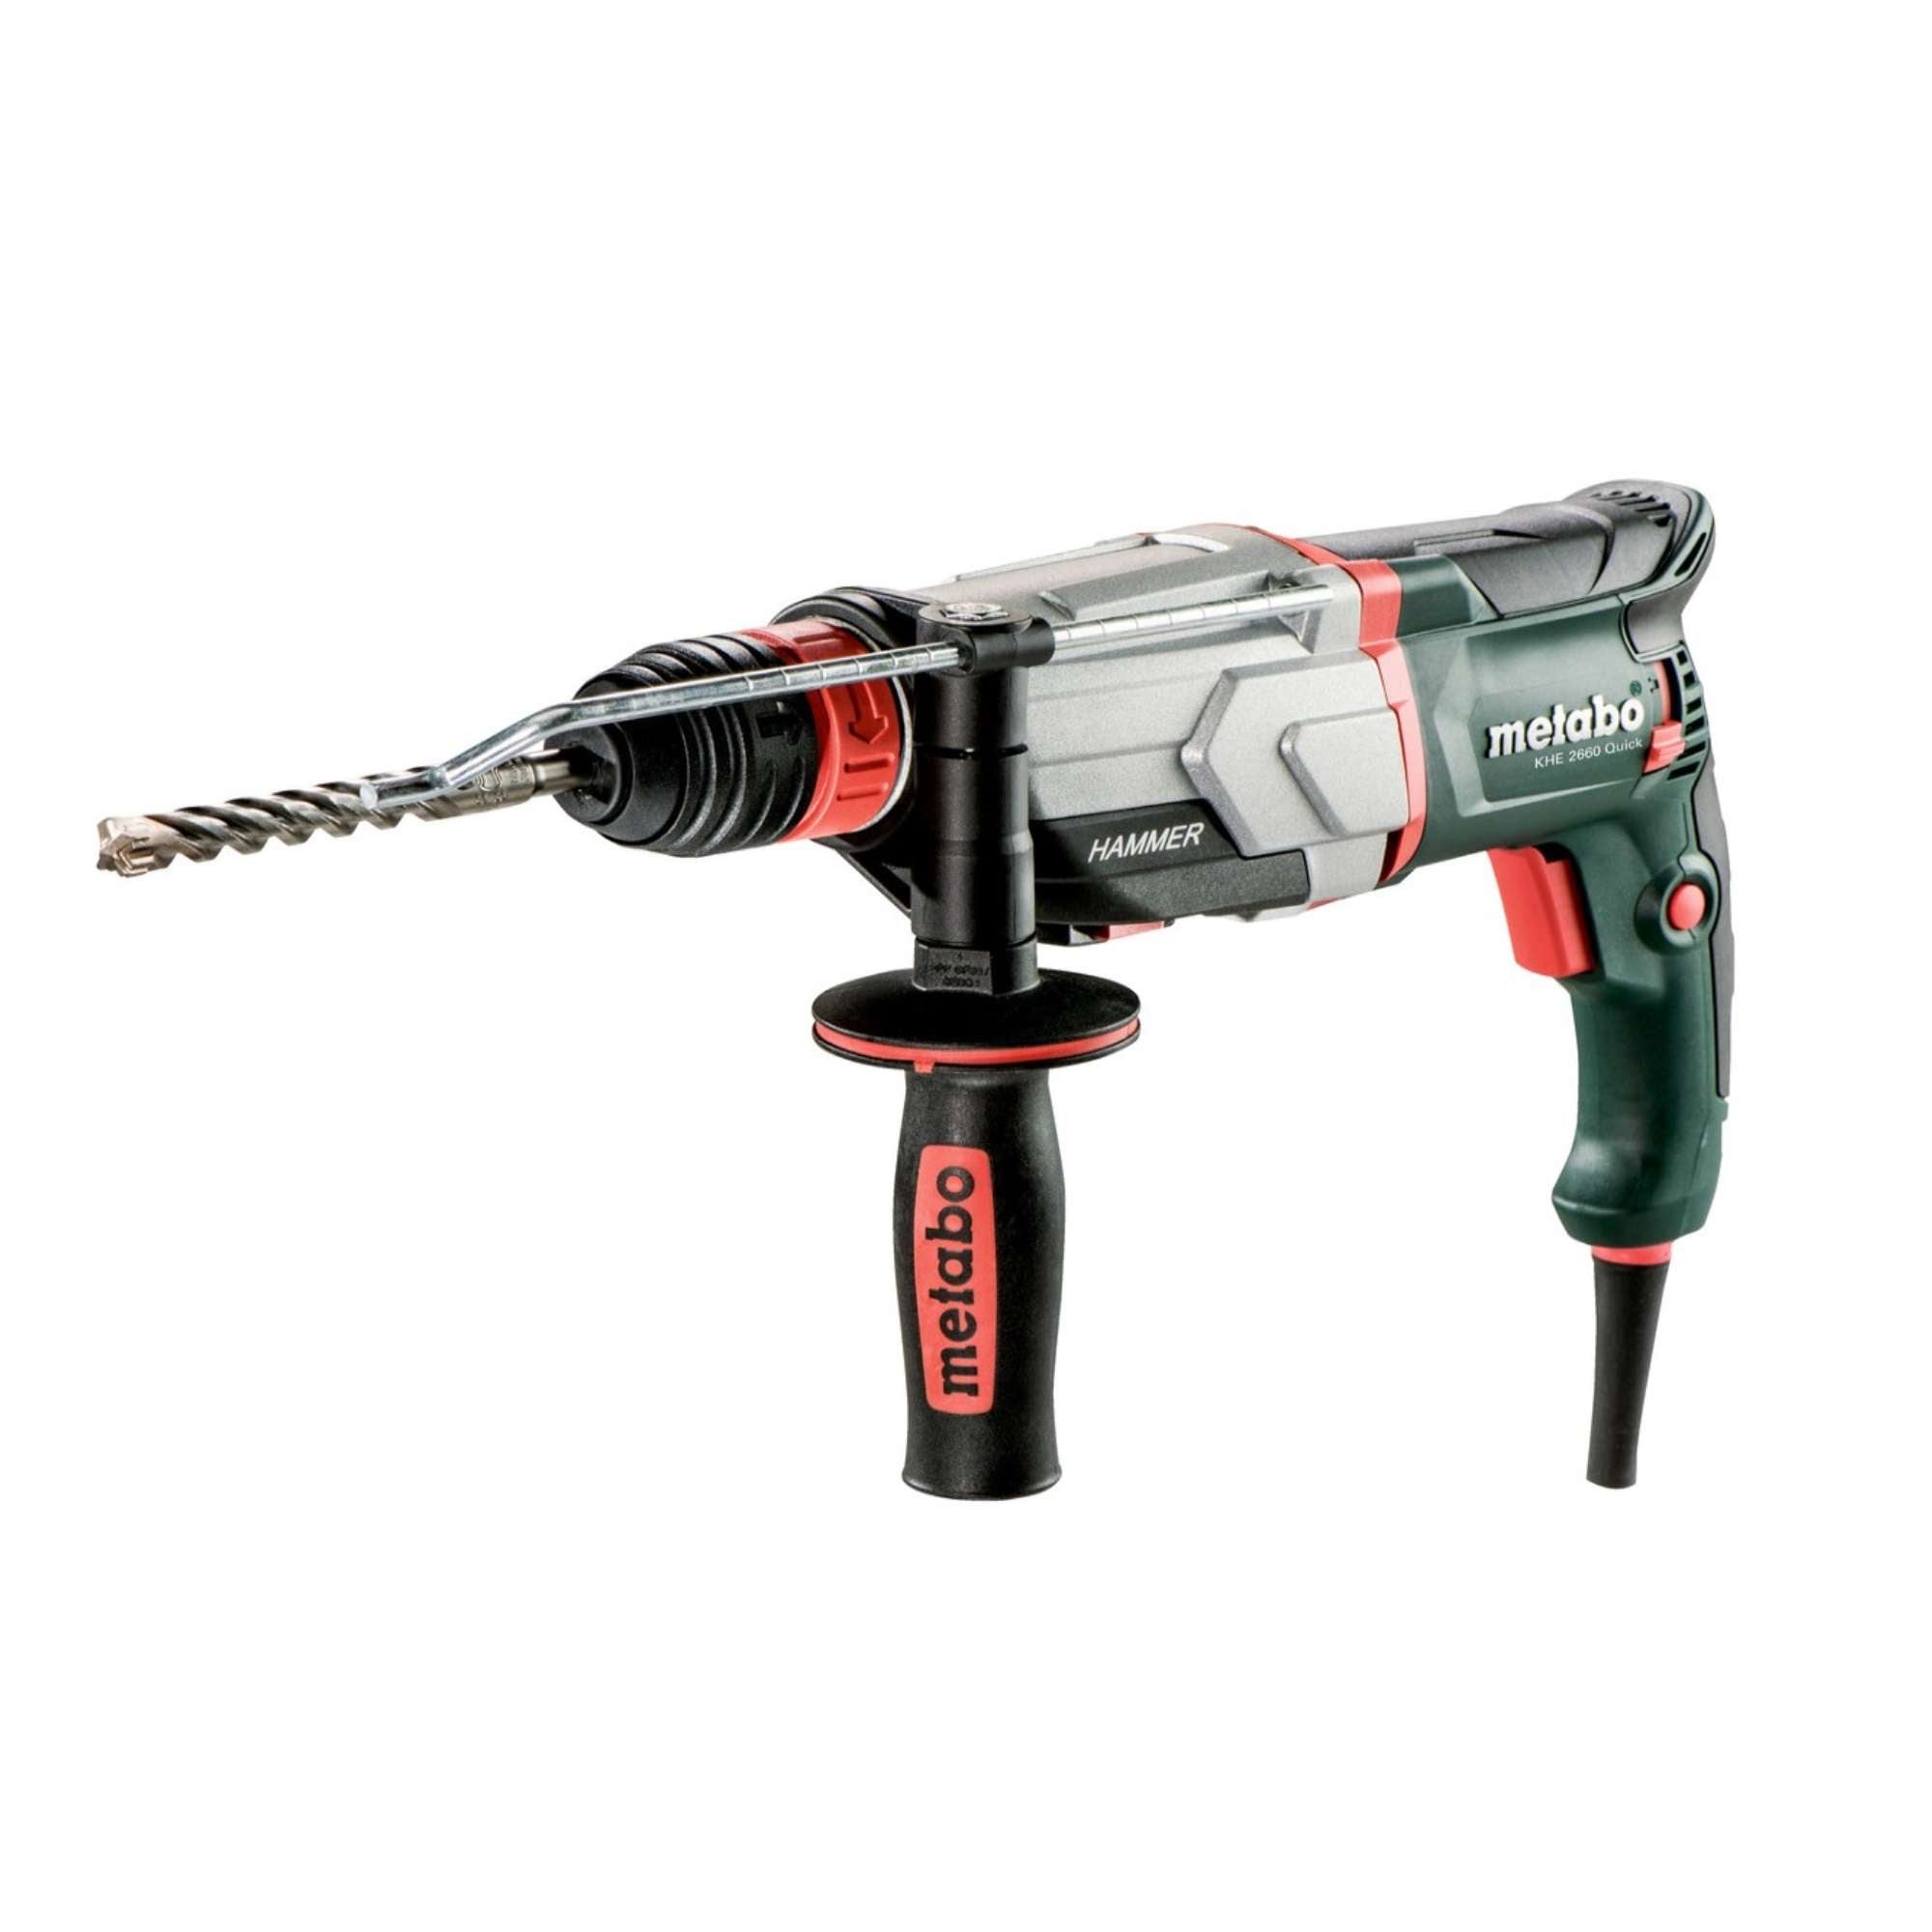 3J hammer drill, combi hammer 850W SDS-plus connection - Metabo KHE 2660